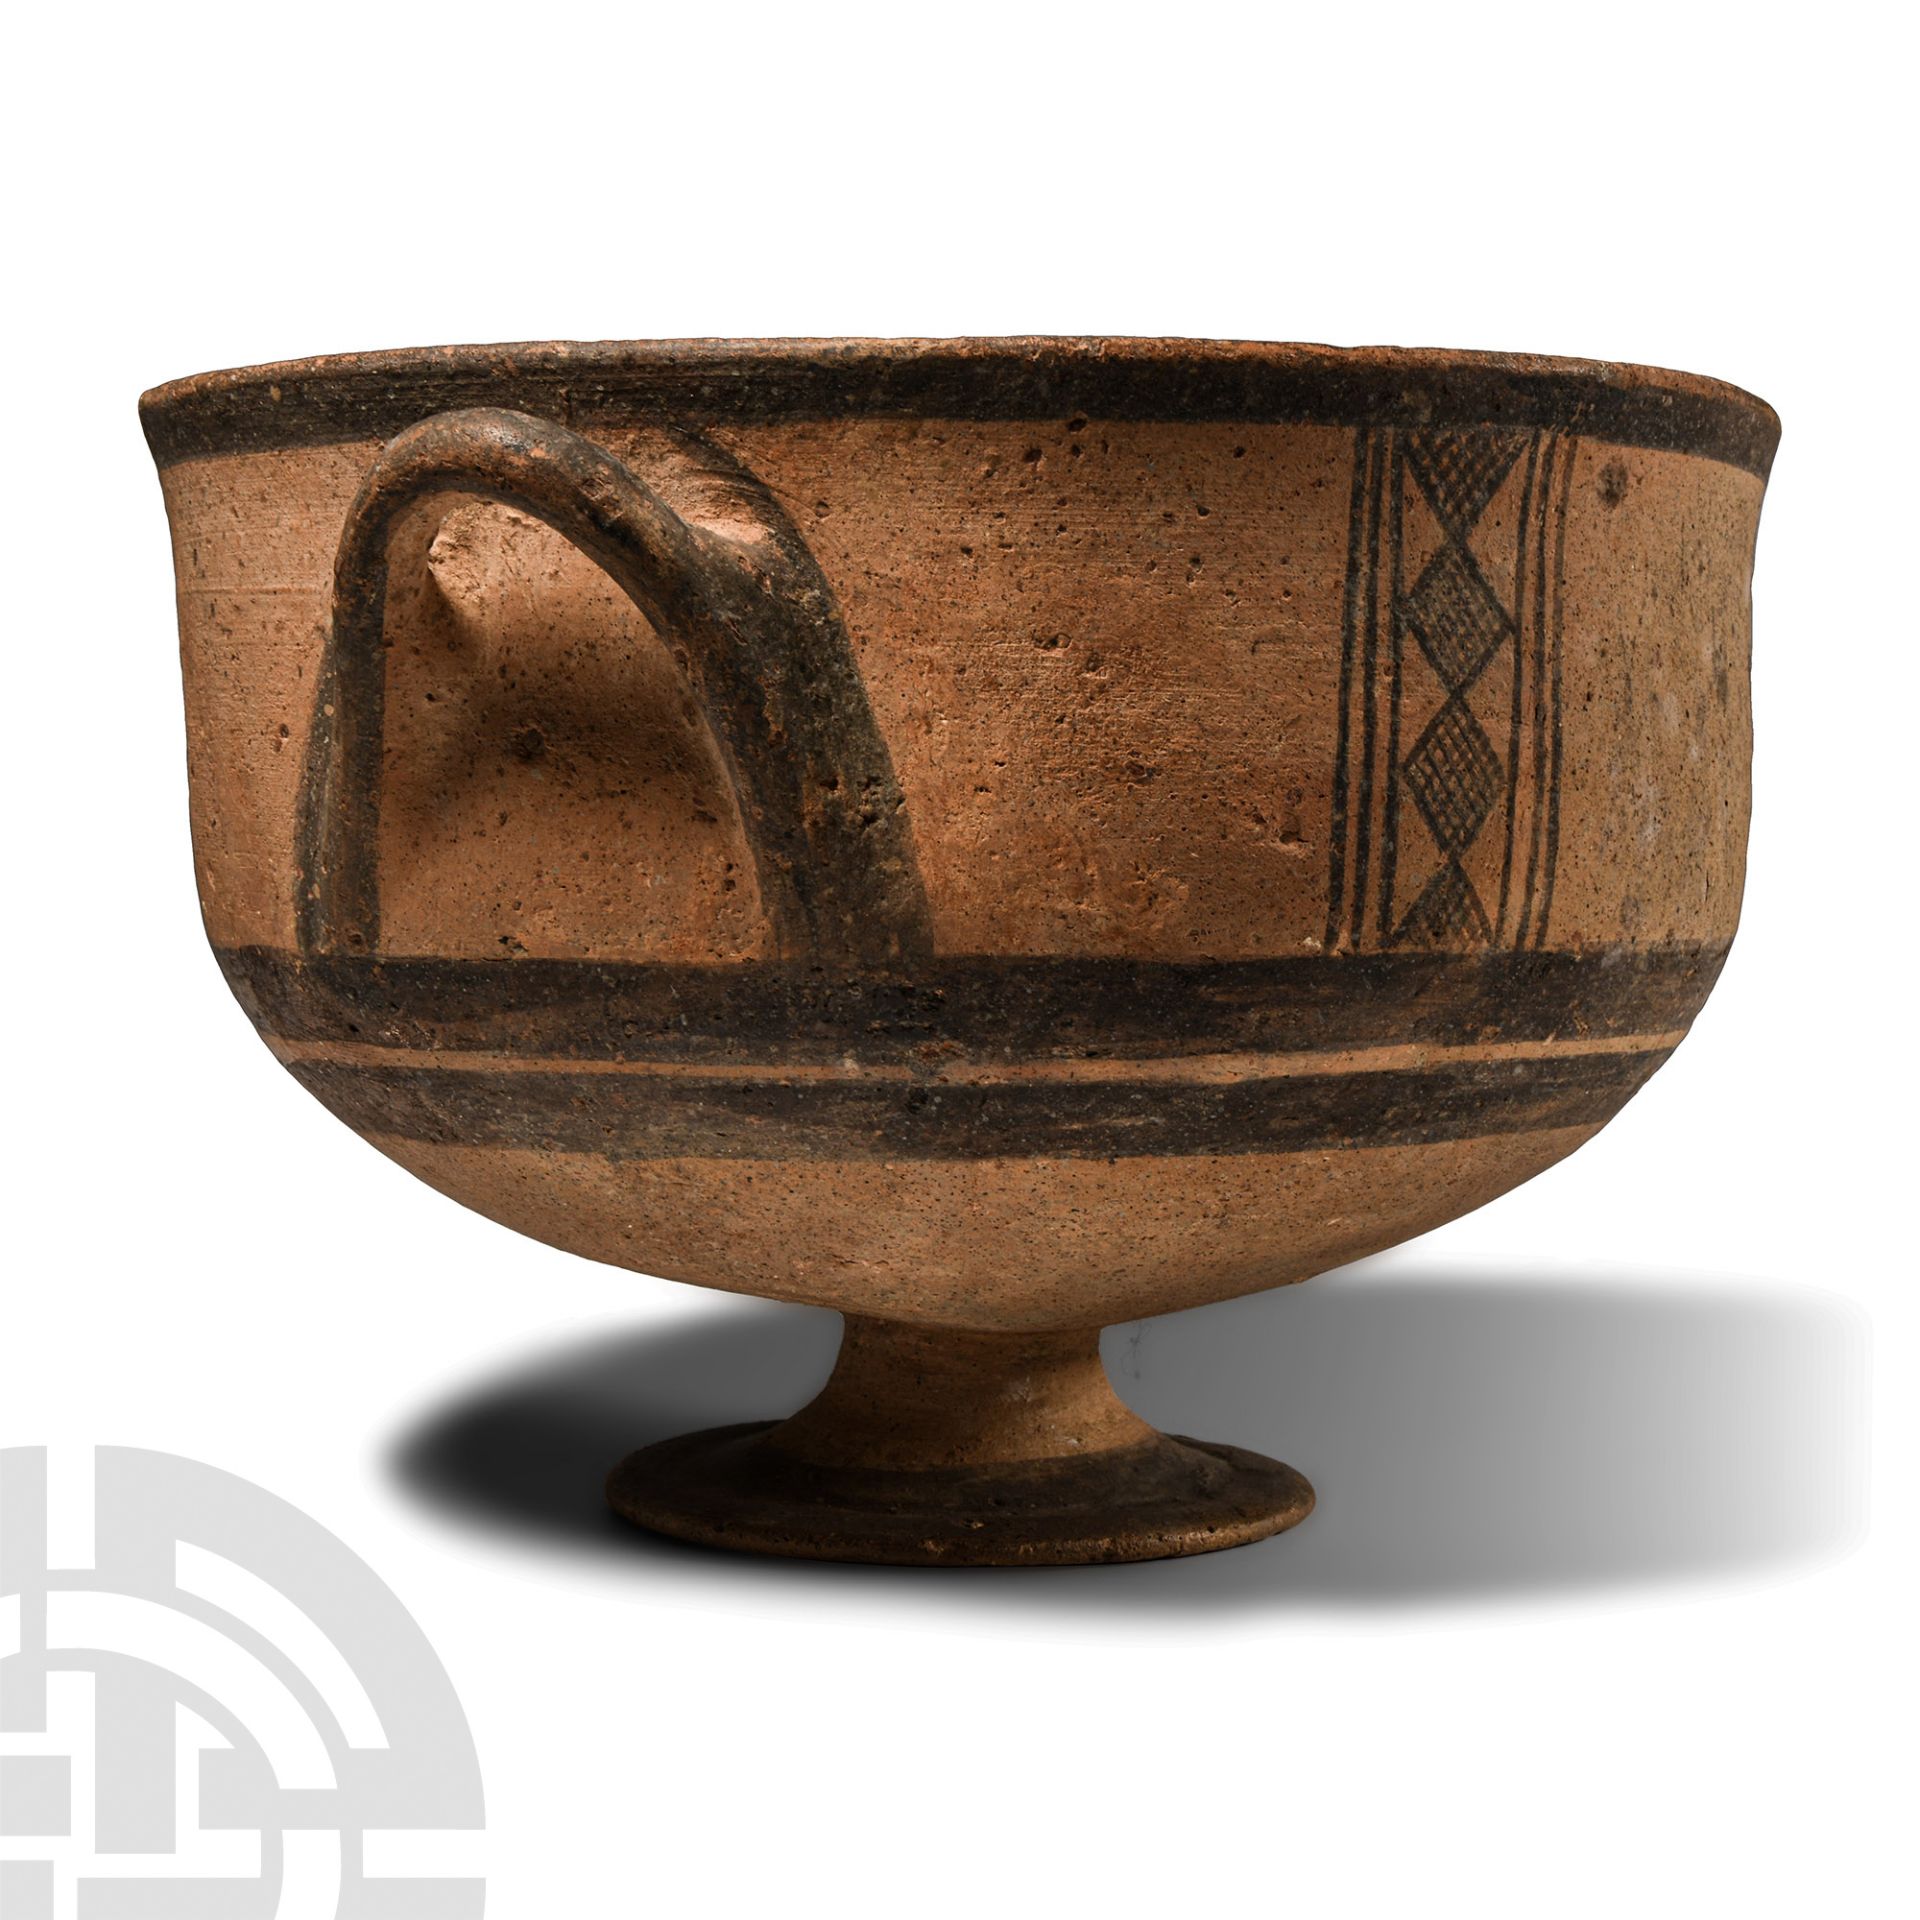 Cypriot Painted Terracotta Chalice - Image 2 of 2